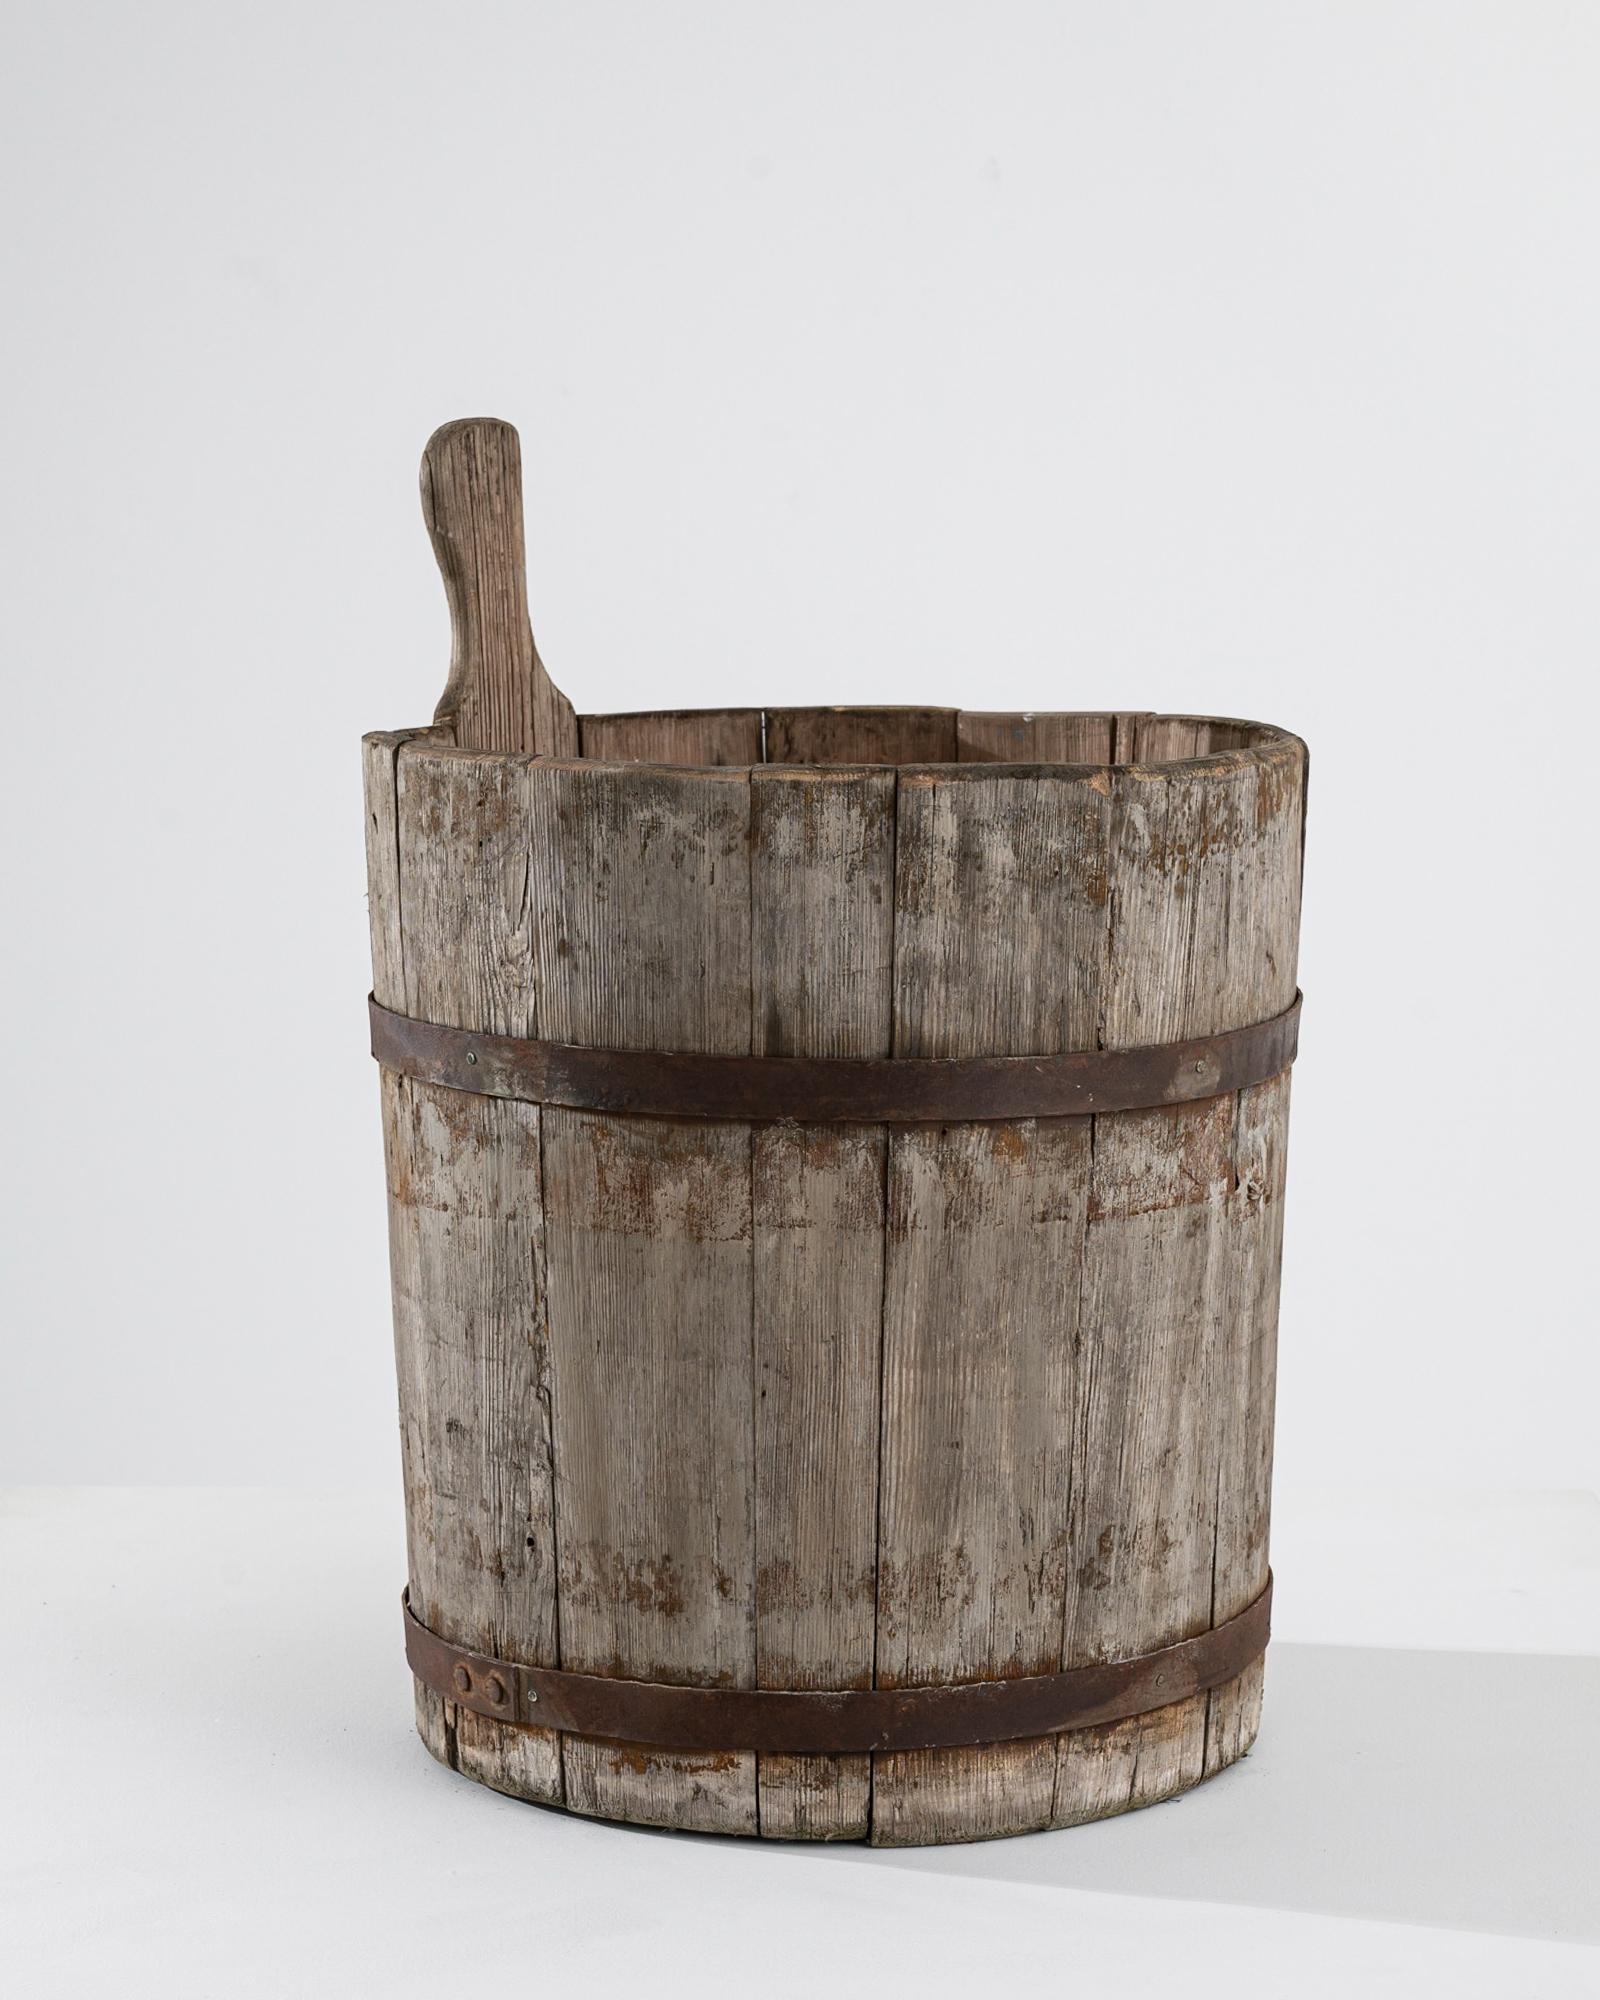 Hewn wooden slats, conjoined by hand-hammered metal bands, this wooden bucket was sourced in Central Europe, dating to the 19th Century. Reminding of a time of hand-made craftsmanship, this rustic accent adds a whisper of history to modern